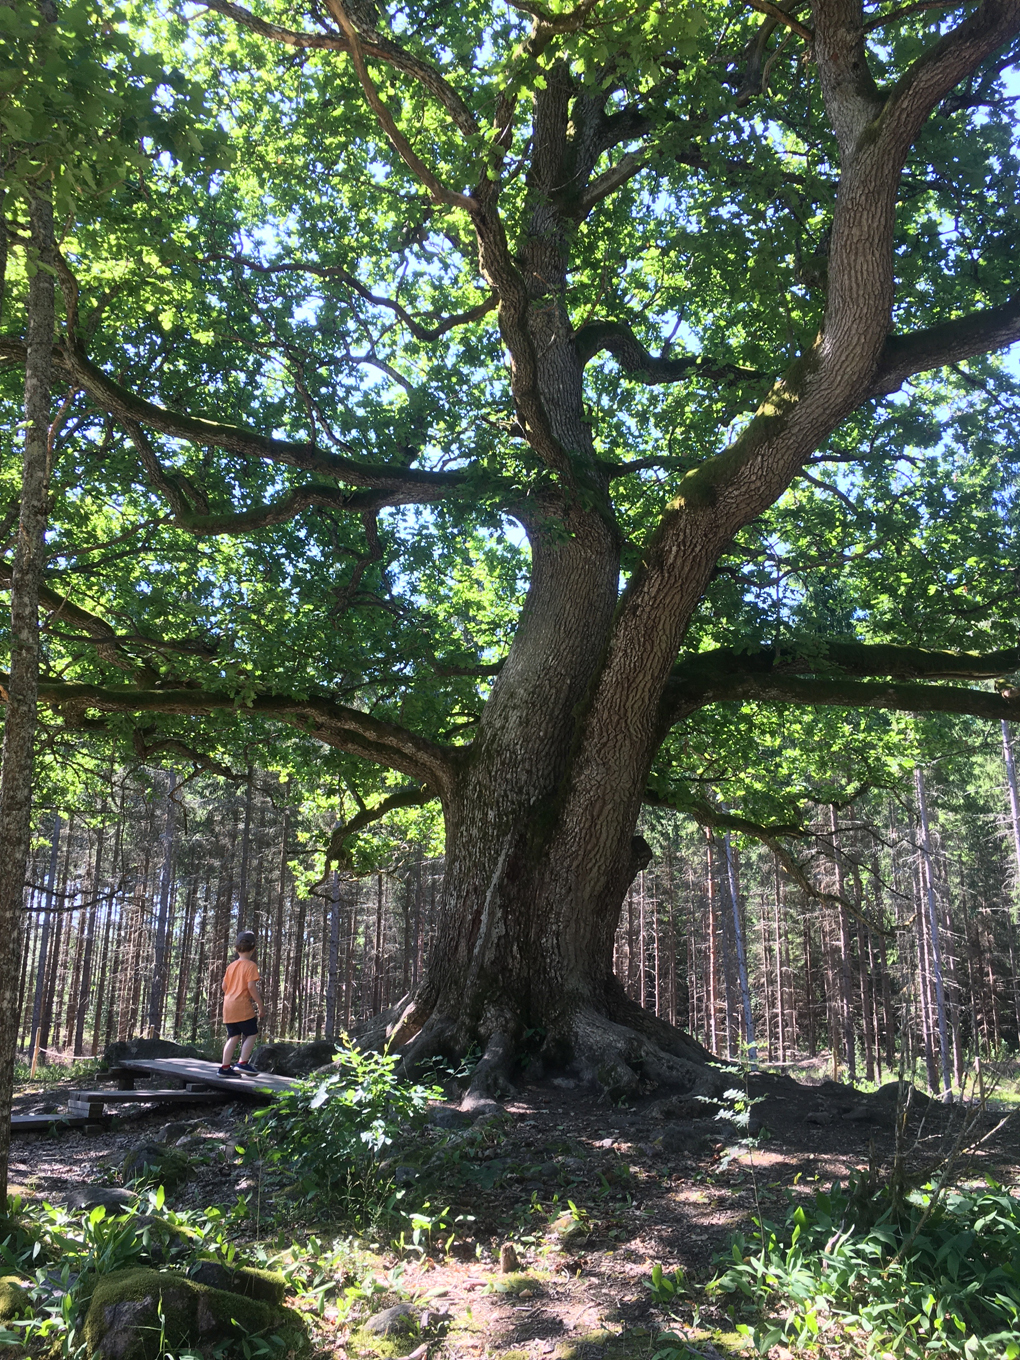 Small person next to a big tree in a forest.